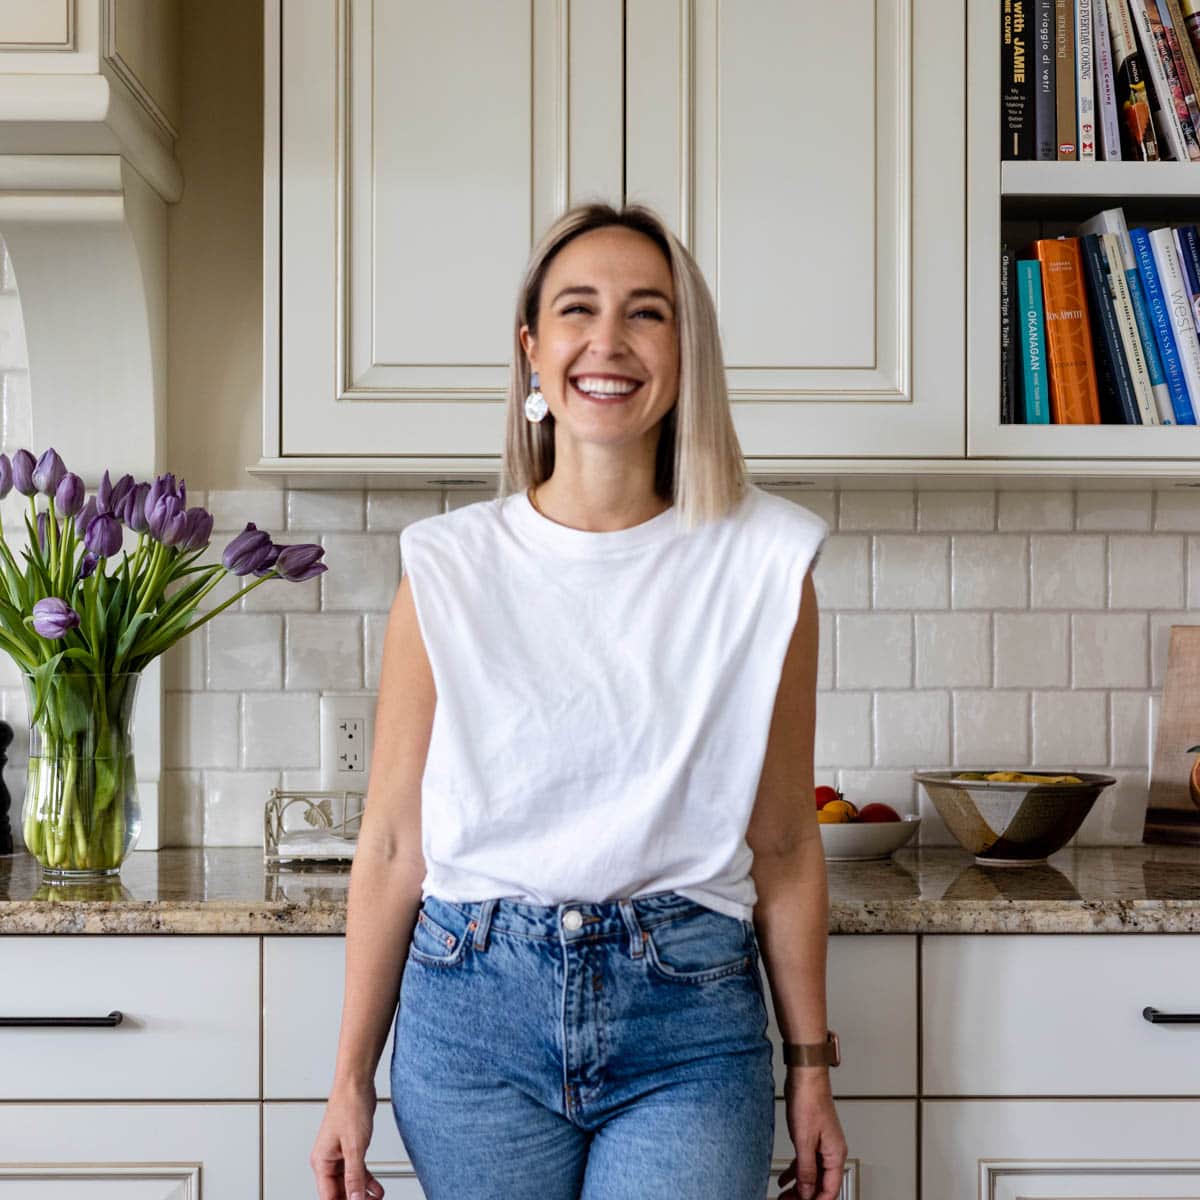 Picture of blond female laughing in kitchen.